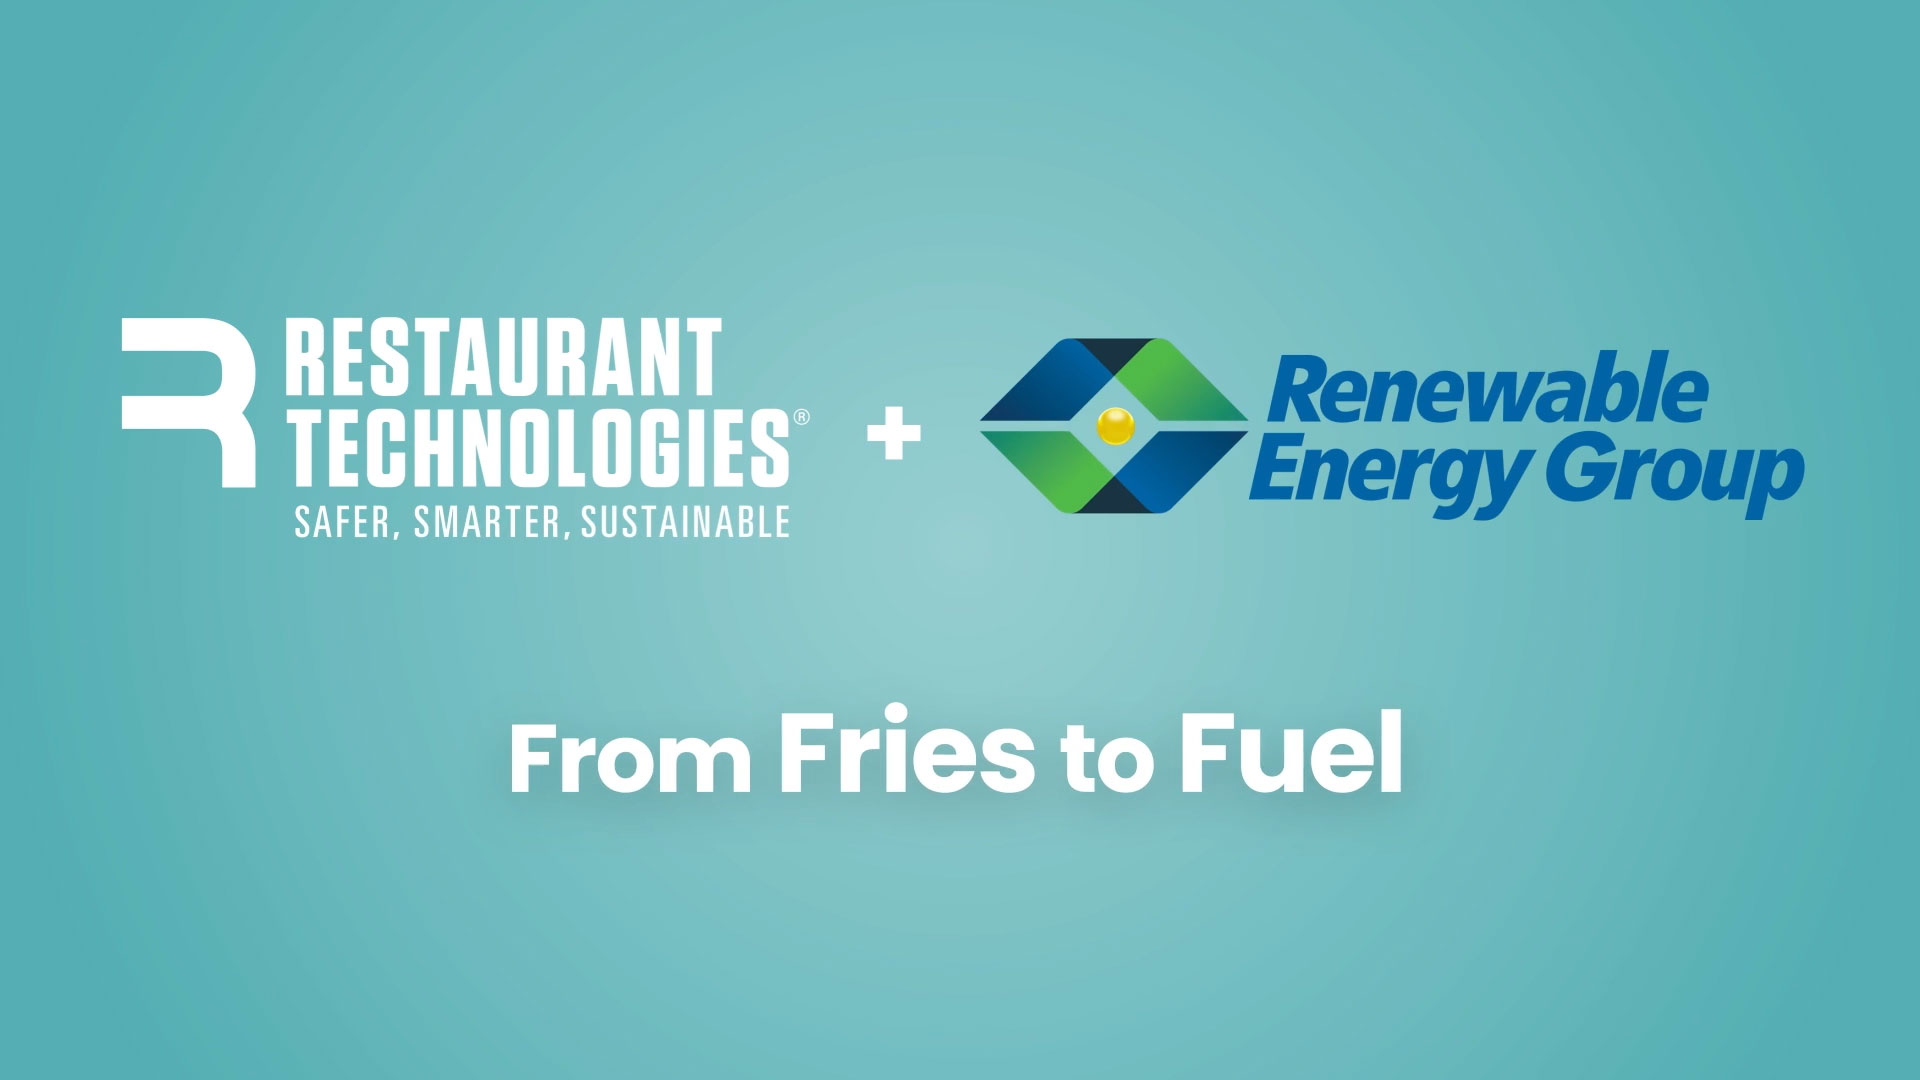 Restaurant Technologies and Chevron Renewable Energy Group fuel fleet vehicles with used restaurant cooking oil. Together they converted more than 300 million pounds of used cooking oil into biofuel in 2021 alone. Restaurant Technologies both collects the oil and uses the biofuel in its own fleet, creating a unique circular economy.